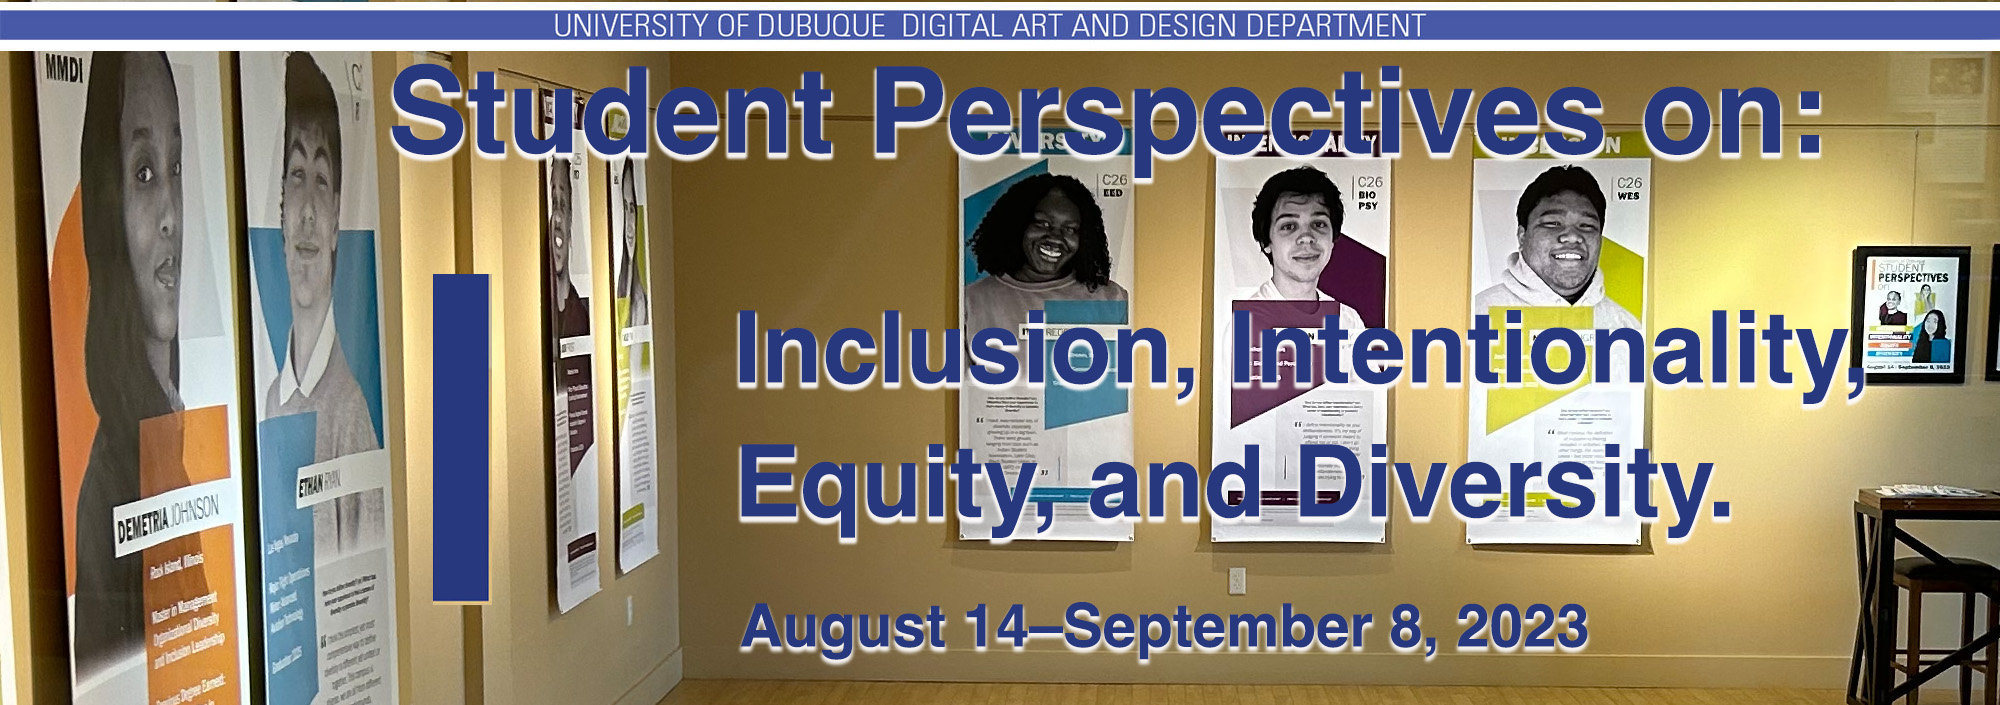 Student Perspectives on: Inclusion, Intentionality, Equity, and Diversity.